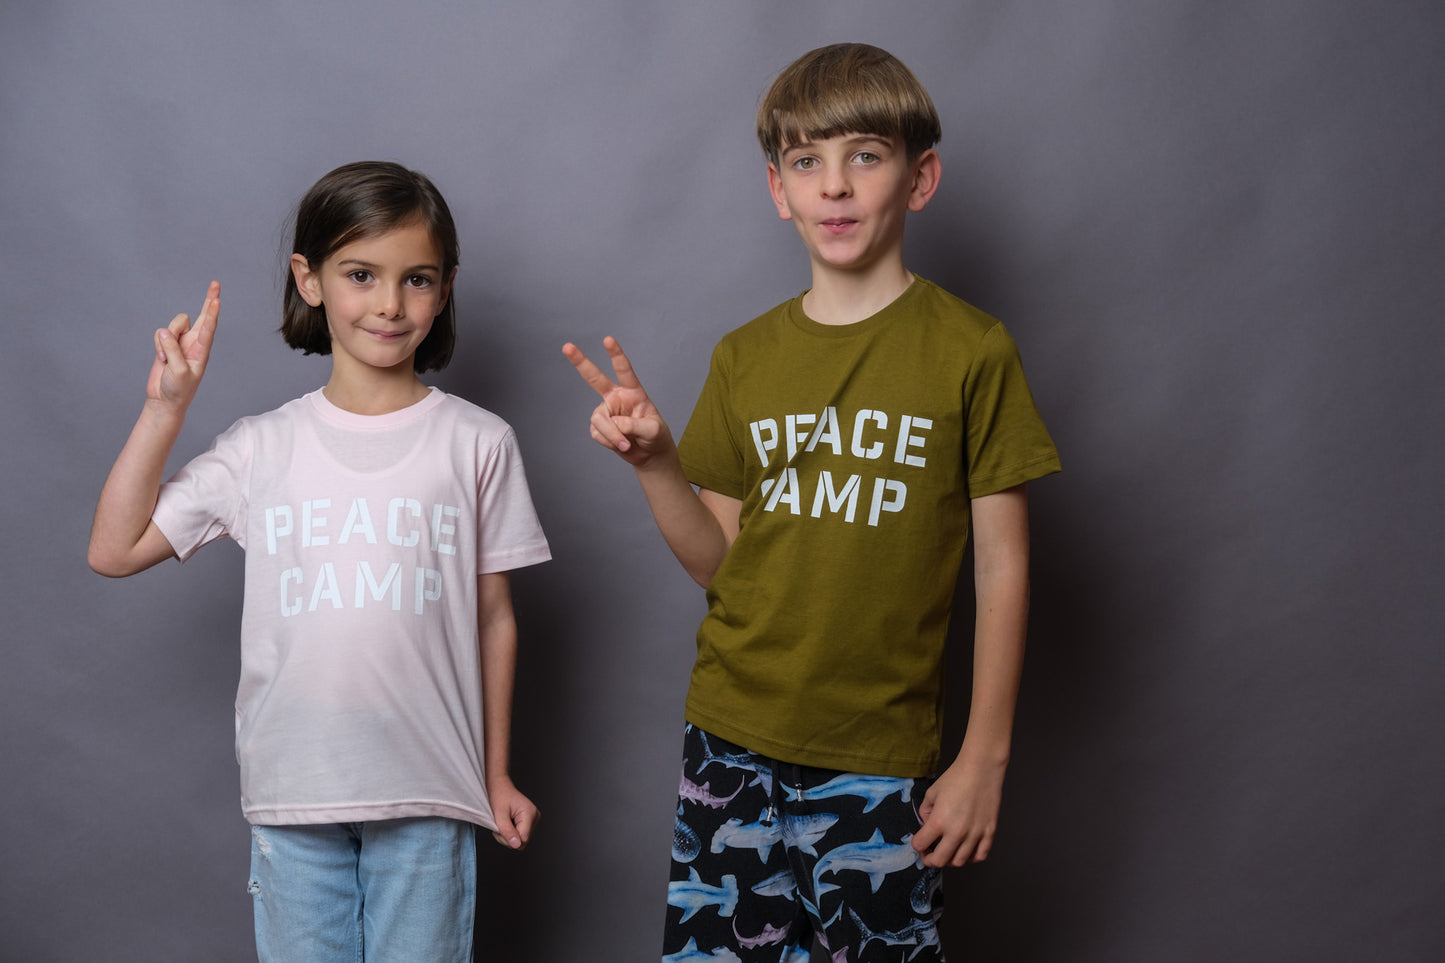 Peace camp t-shirts for girls and boys